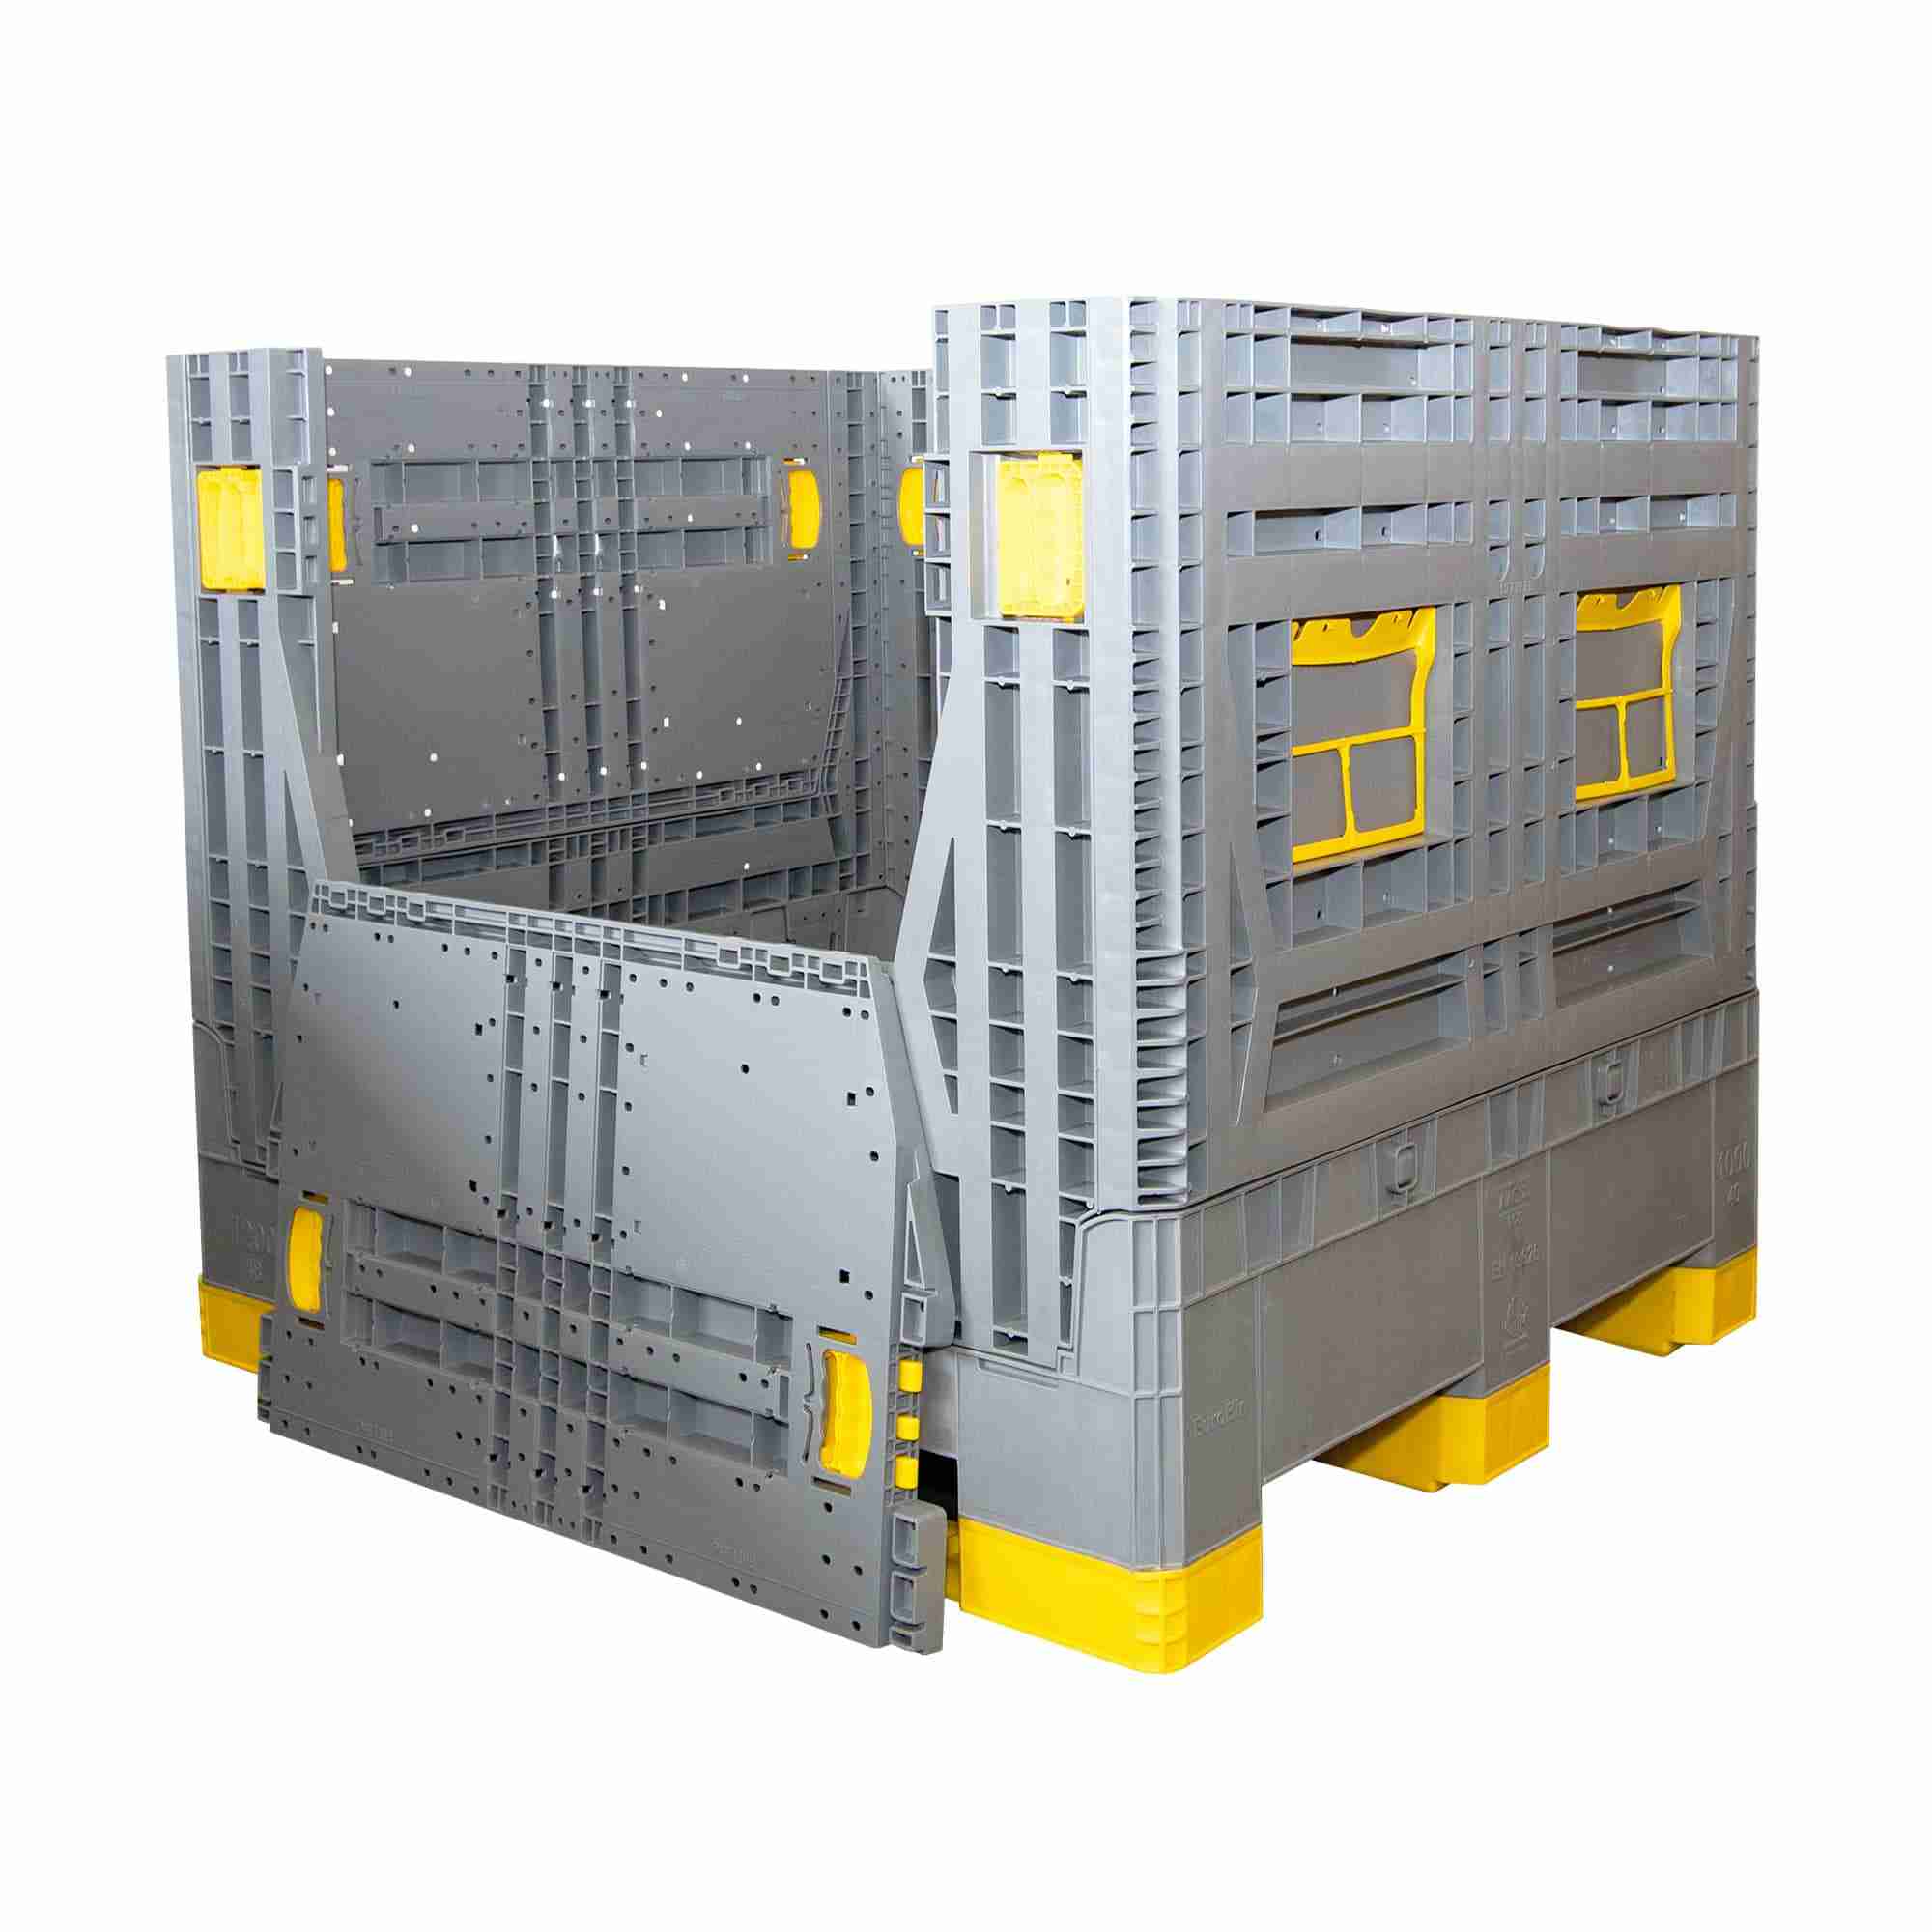 Palboxx Collapsible Pallet Box 1200mm x 1000mm x 980mm - 3 Runners